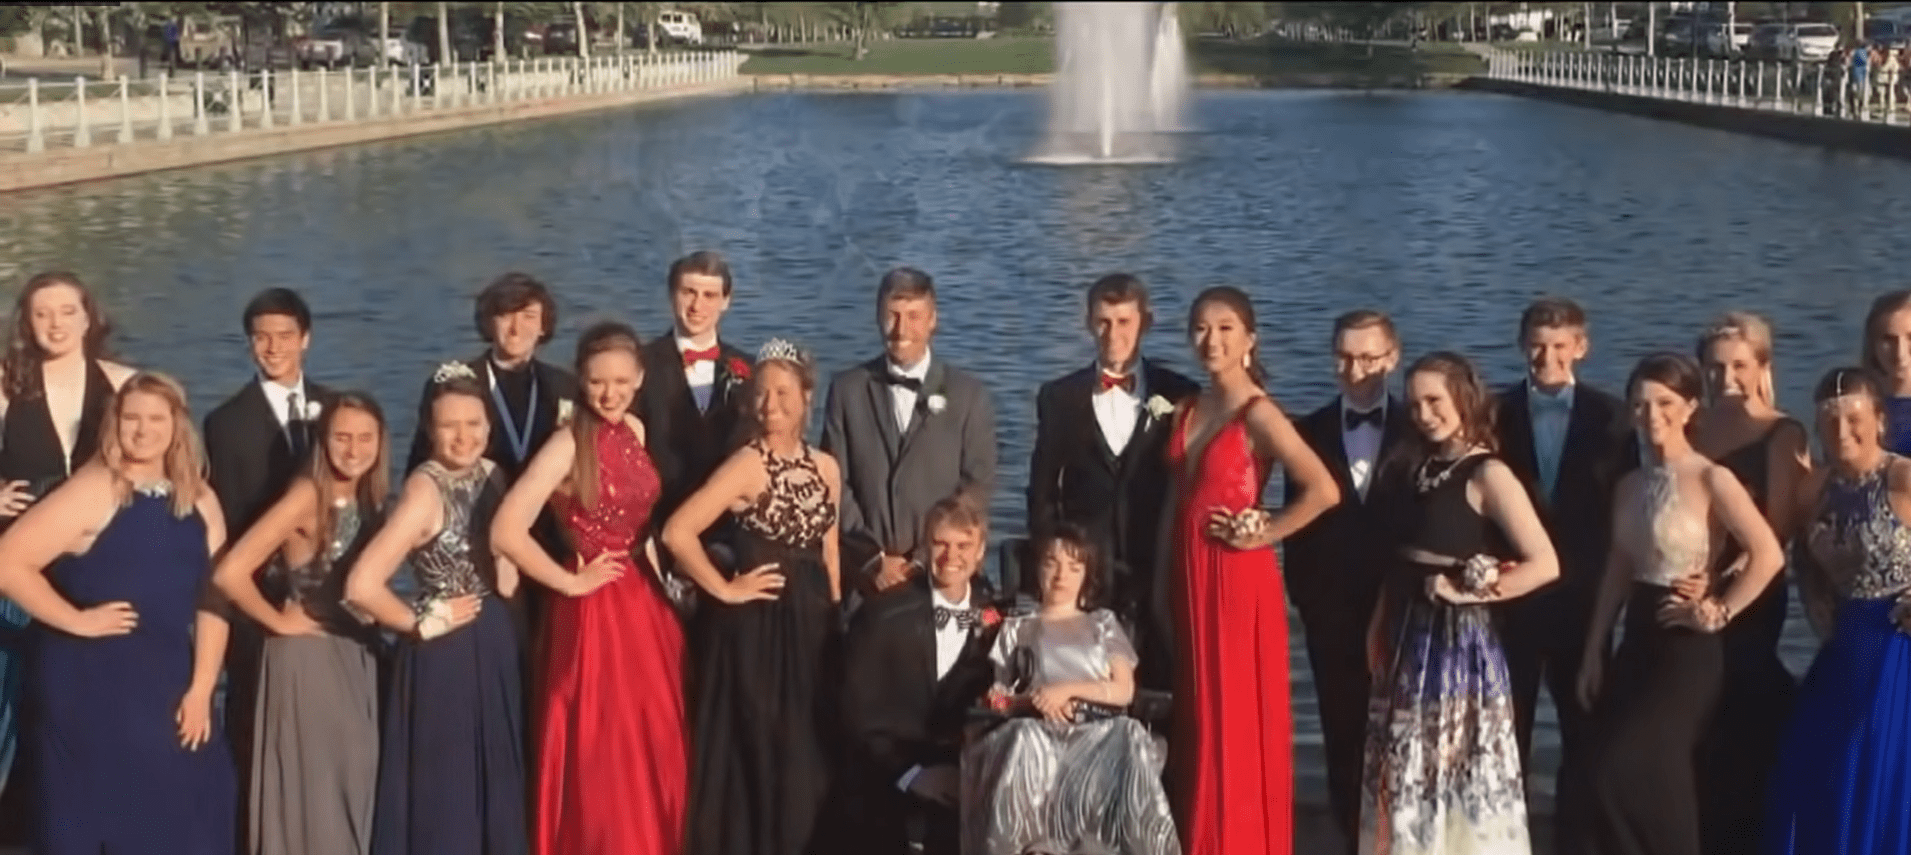 Ellie McCool, her friends and her date Brendan Ritchie posing for a prom picture.│Source: youtube.com/KSDK News